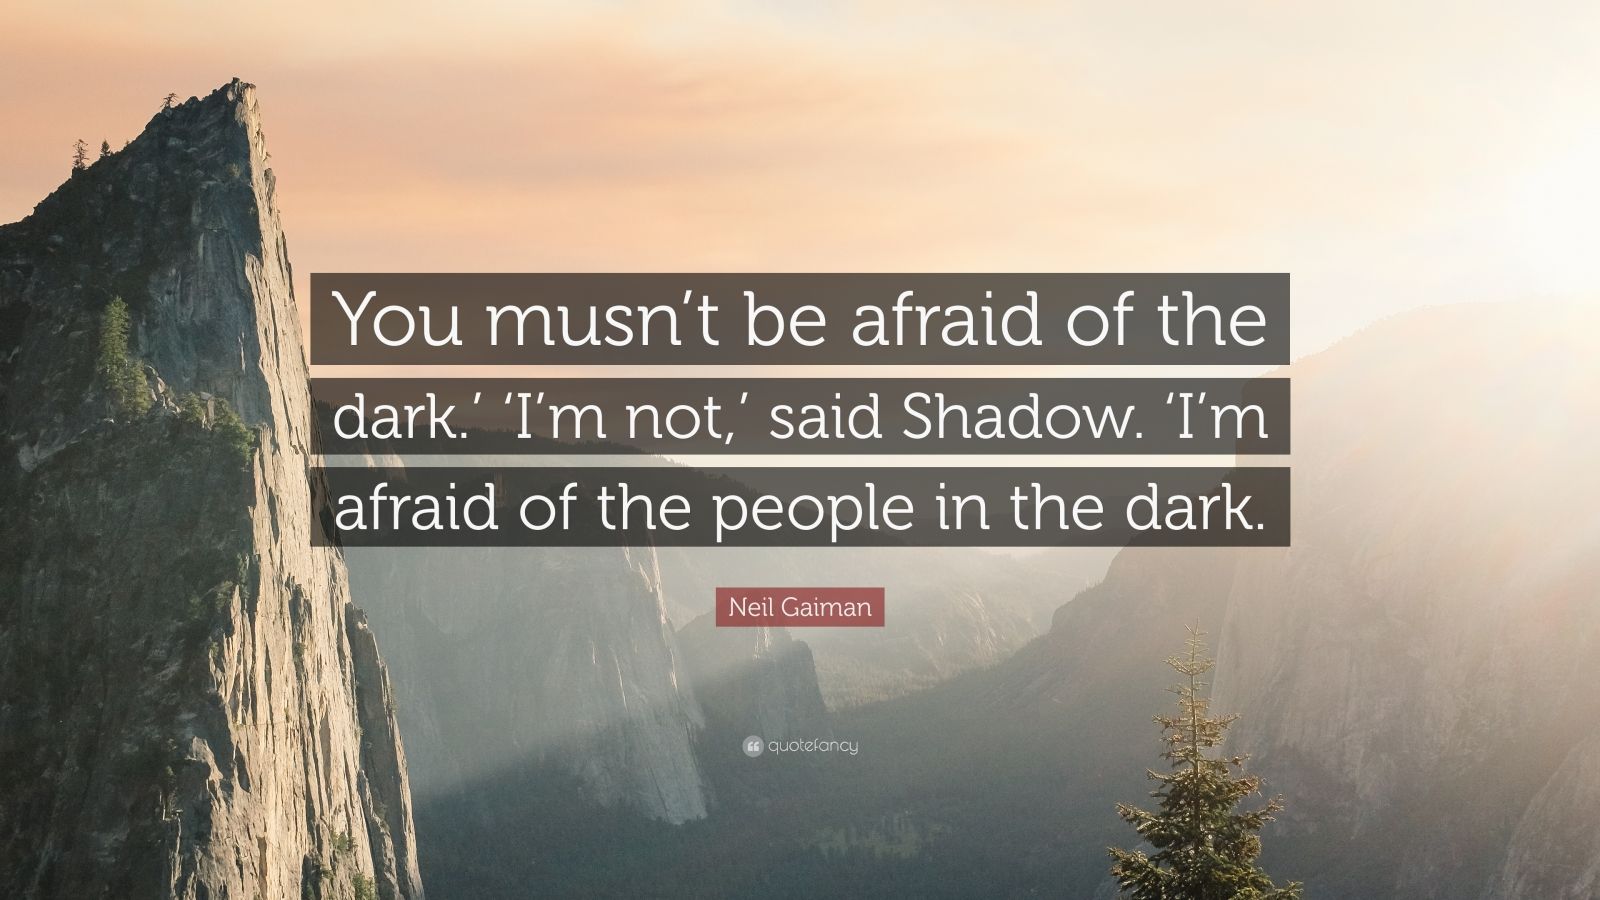 Neil Gaiman Quote: "You musn't be afraid of the dark.' 'I'm not,' said Shadow. 'I'm afraid of ...